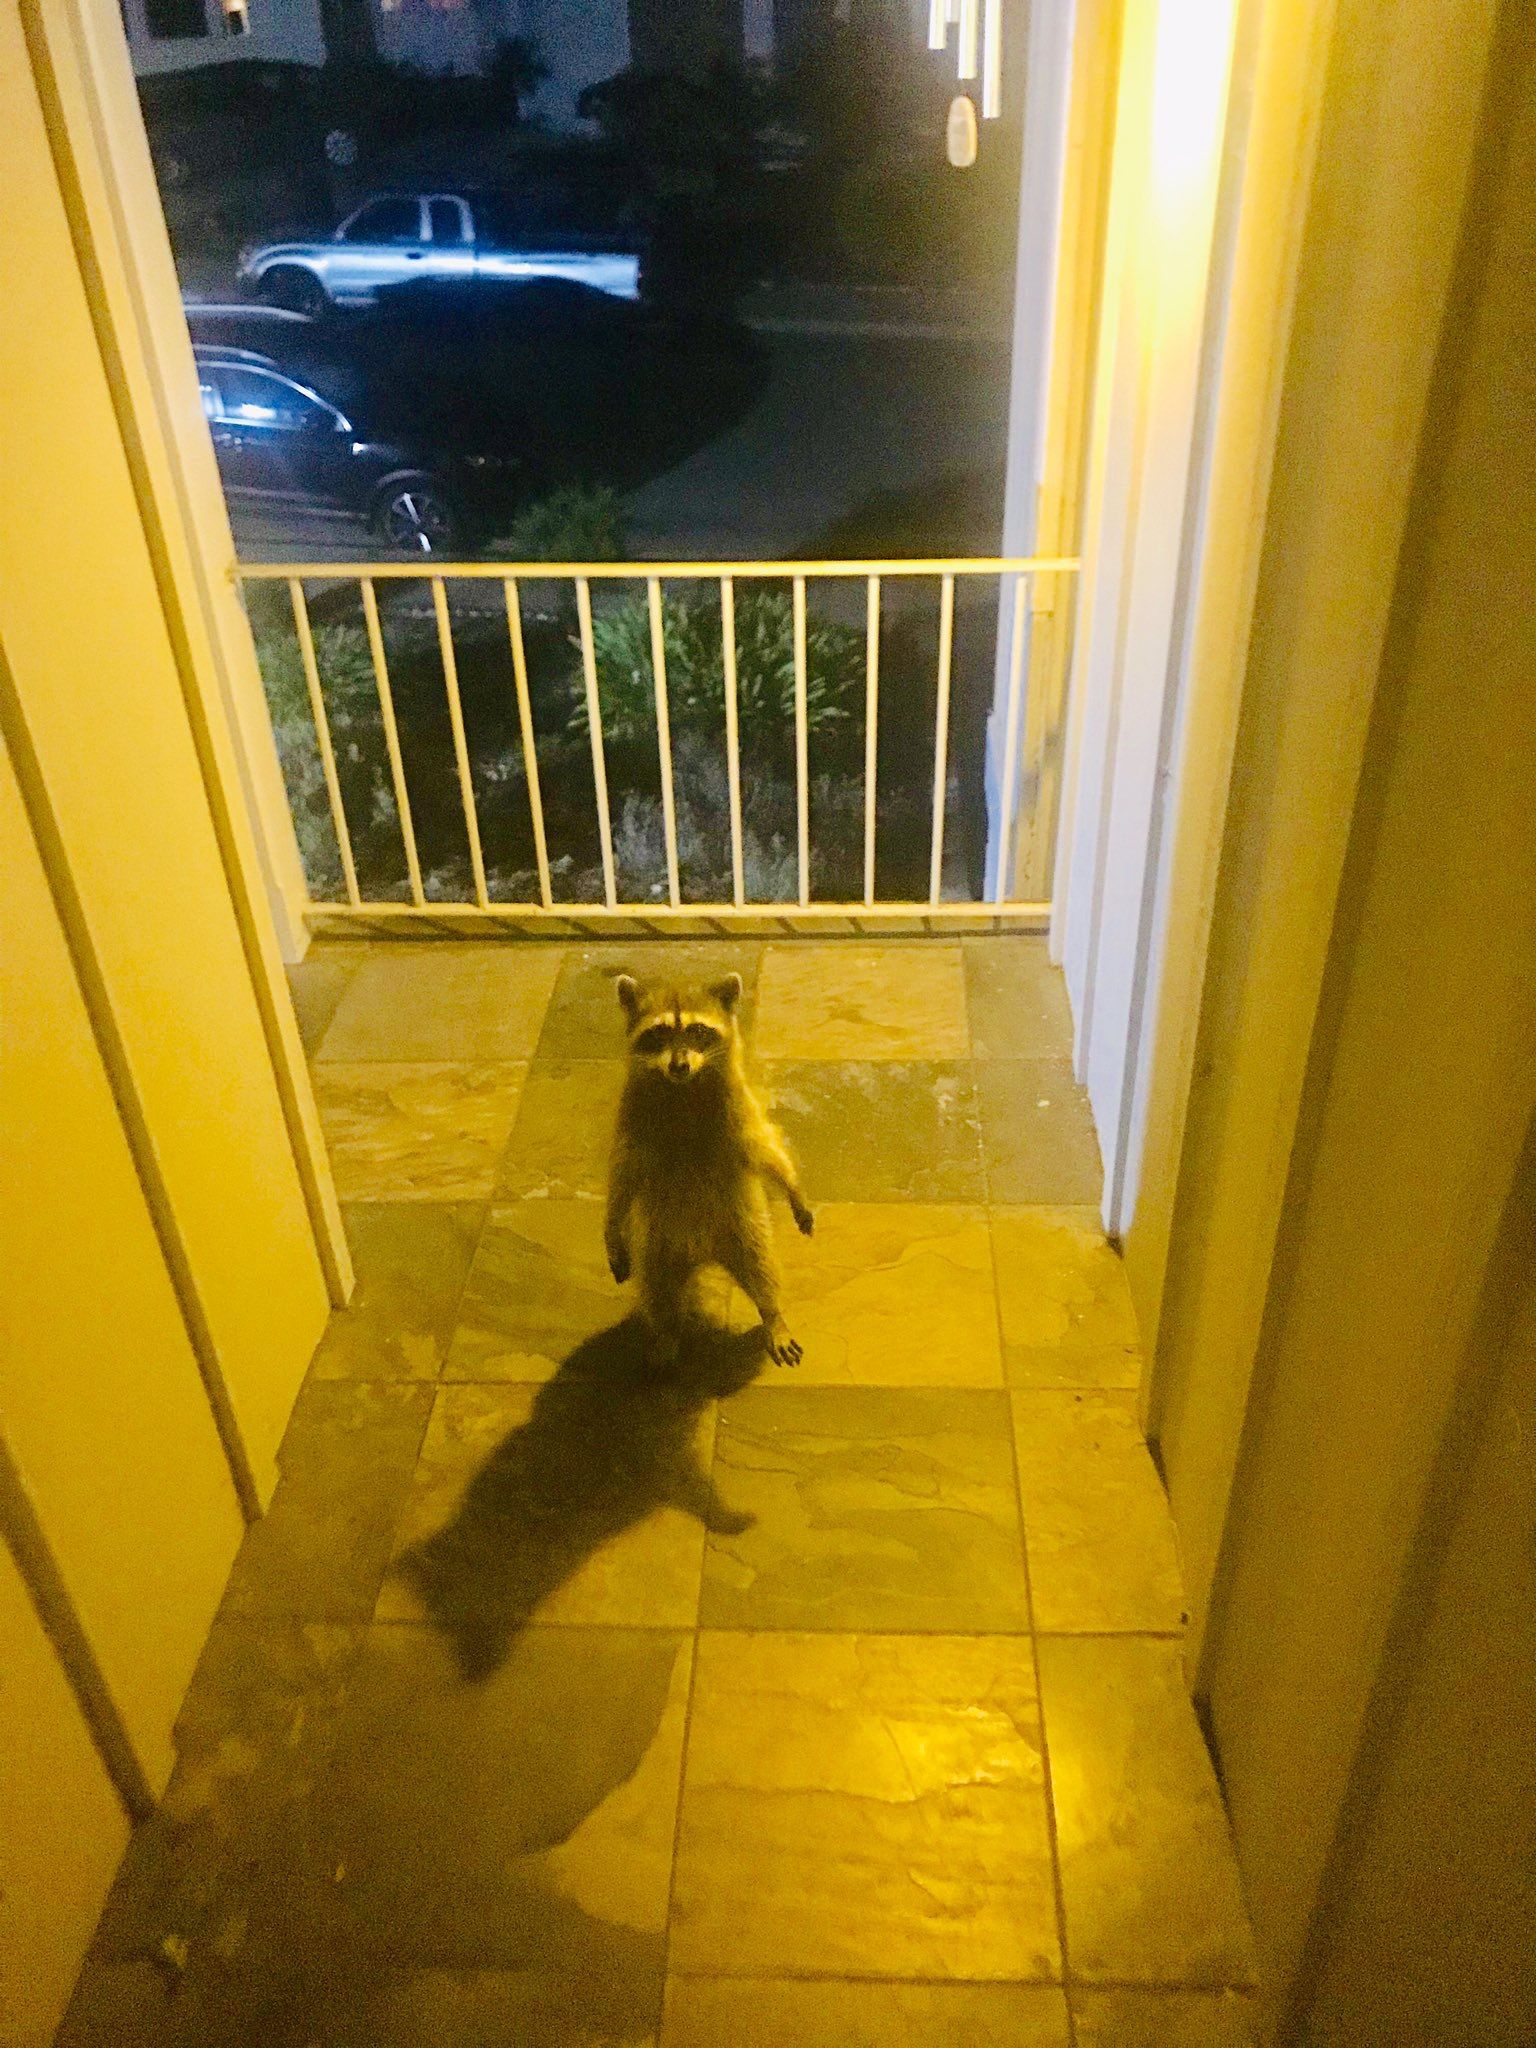 I came home last night to find this thief just standing there menacingly.